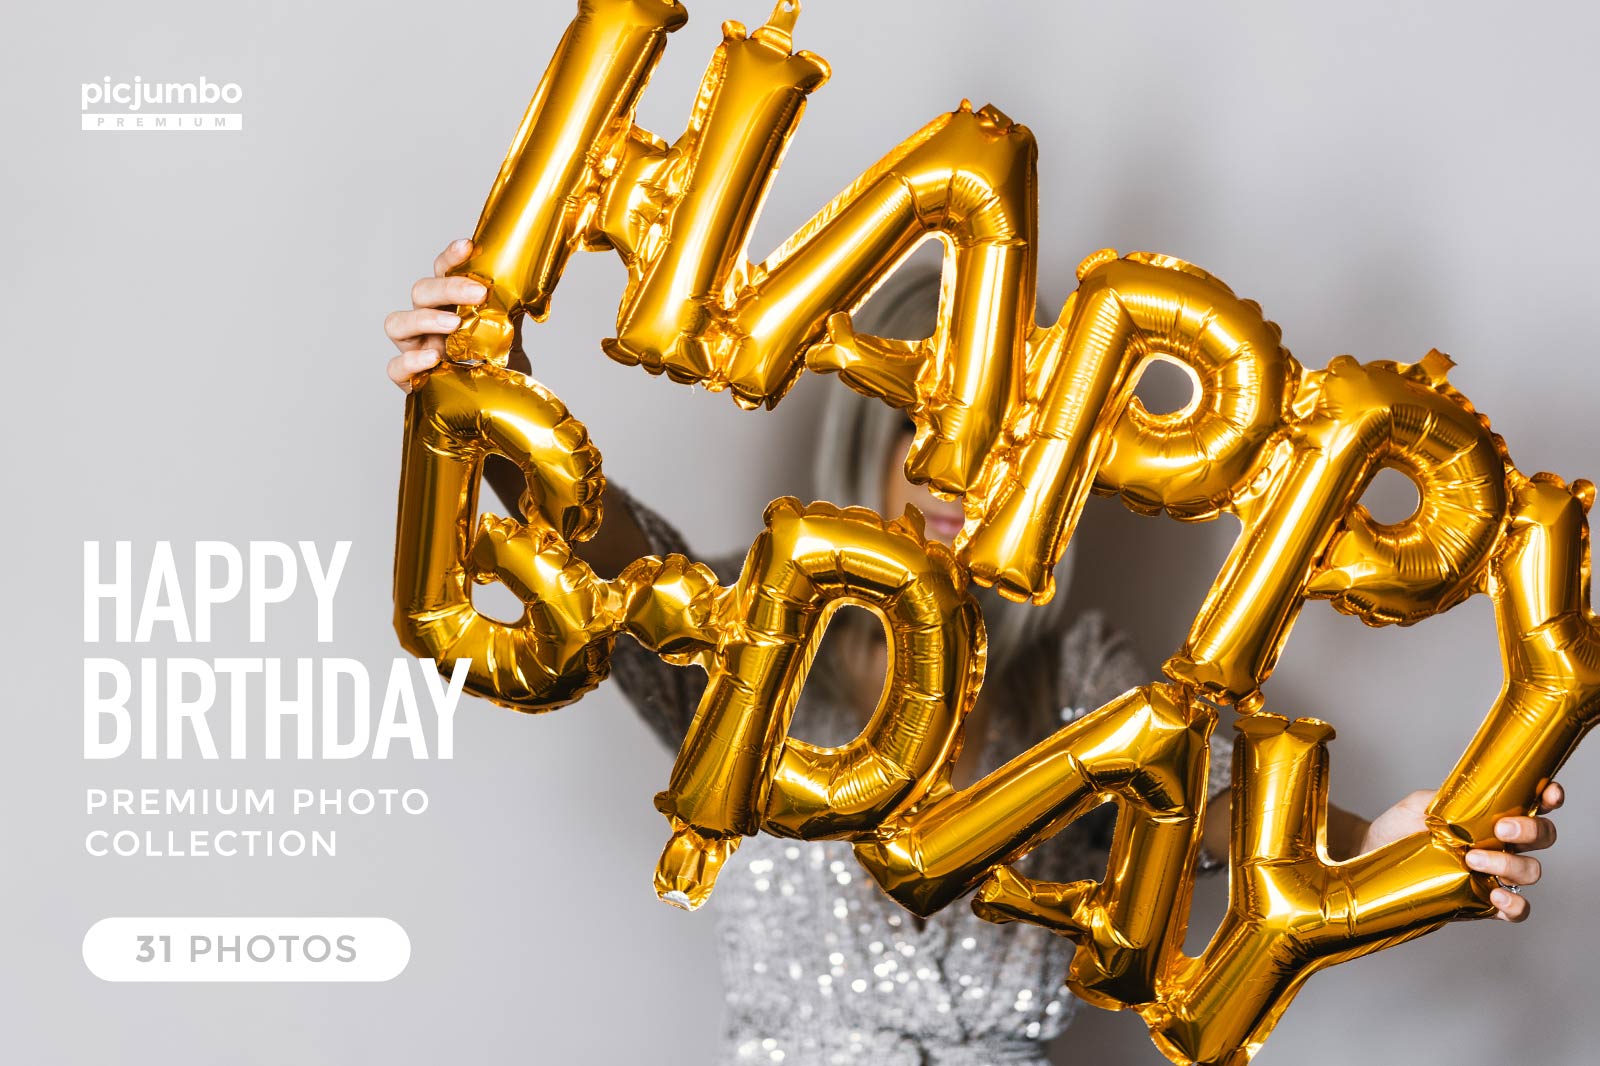 Download hi-res stock photos from our Happy Birthday PREMIUM Collection!